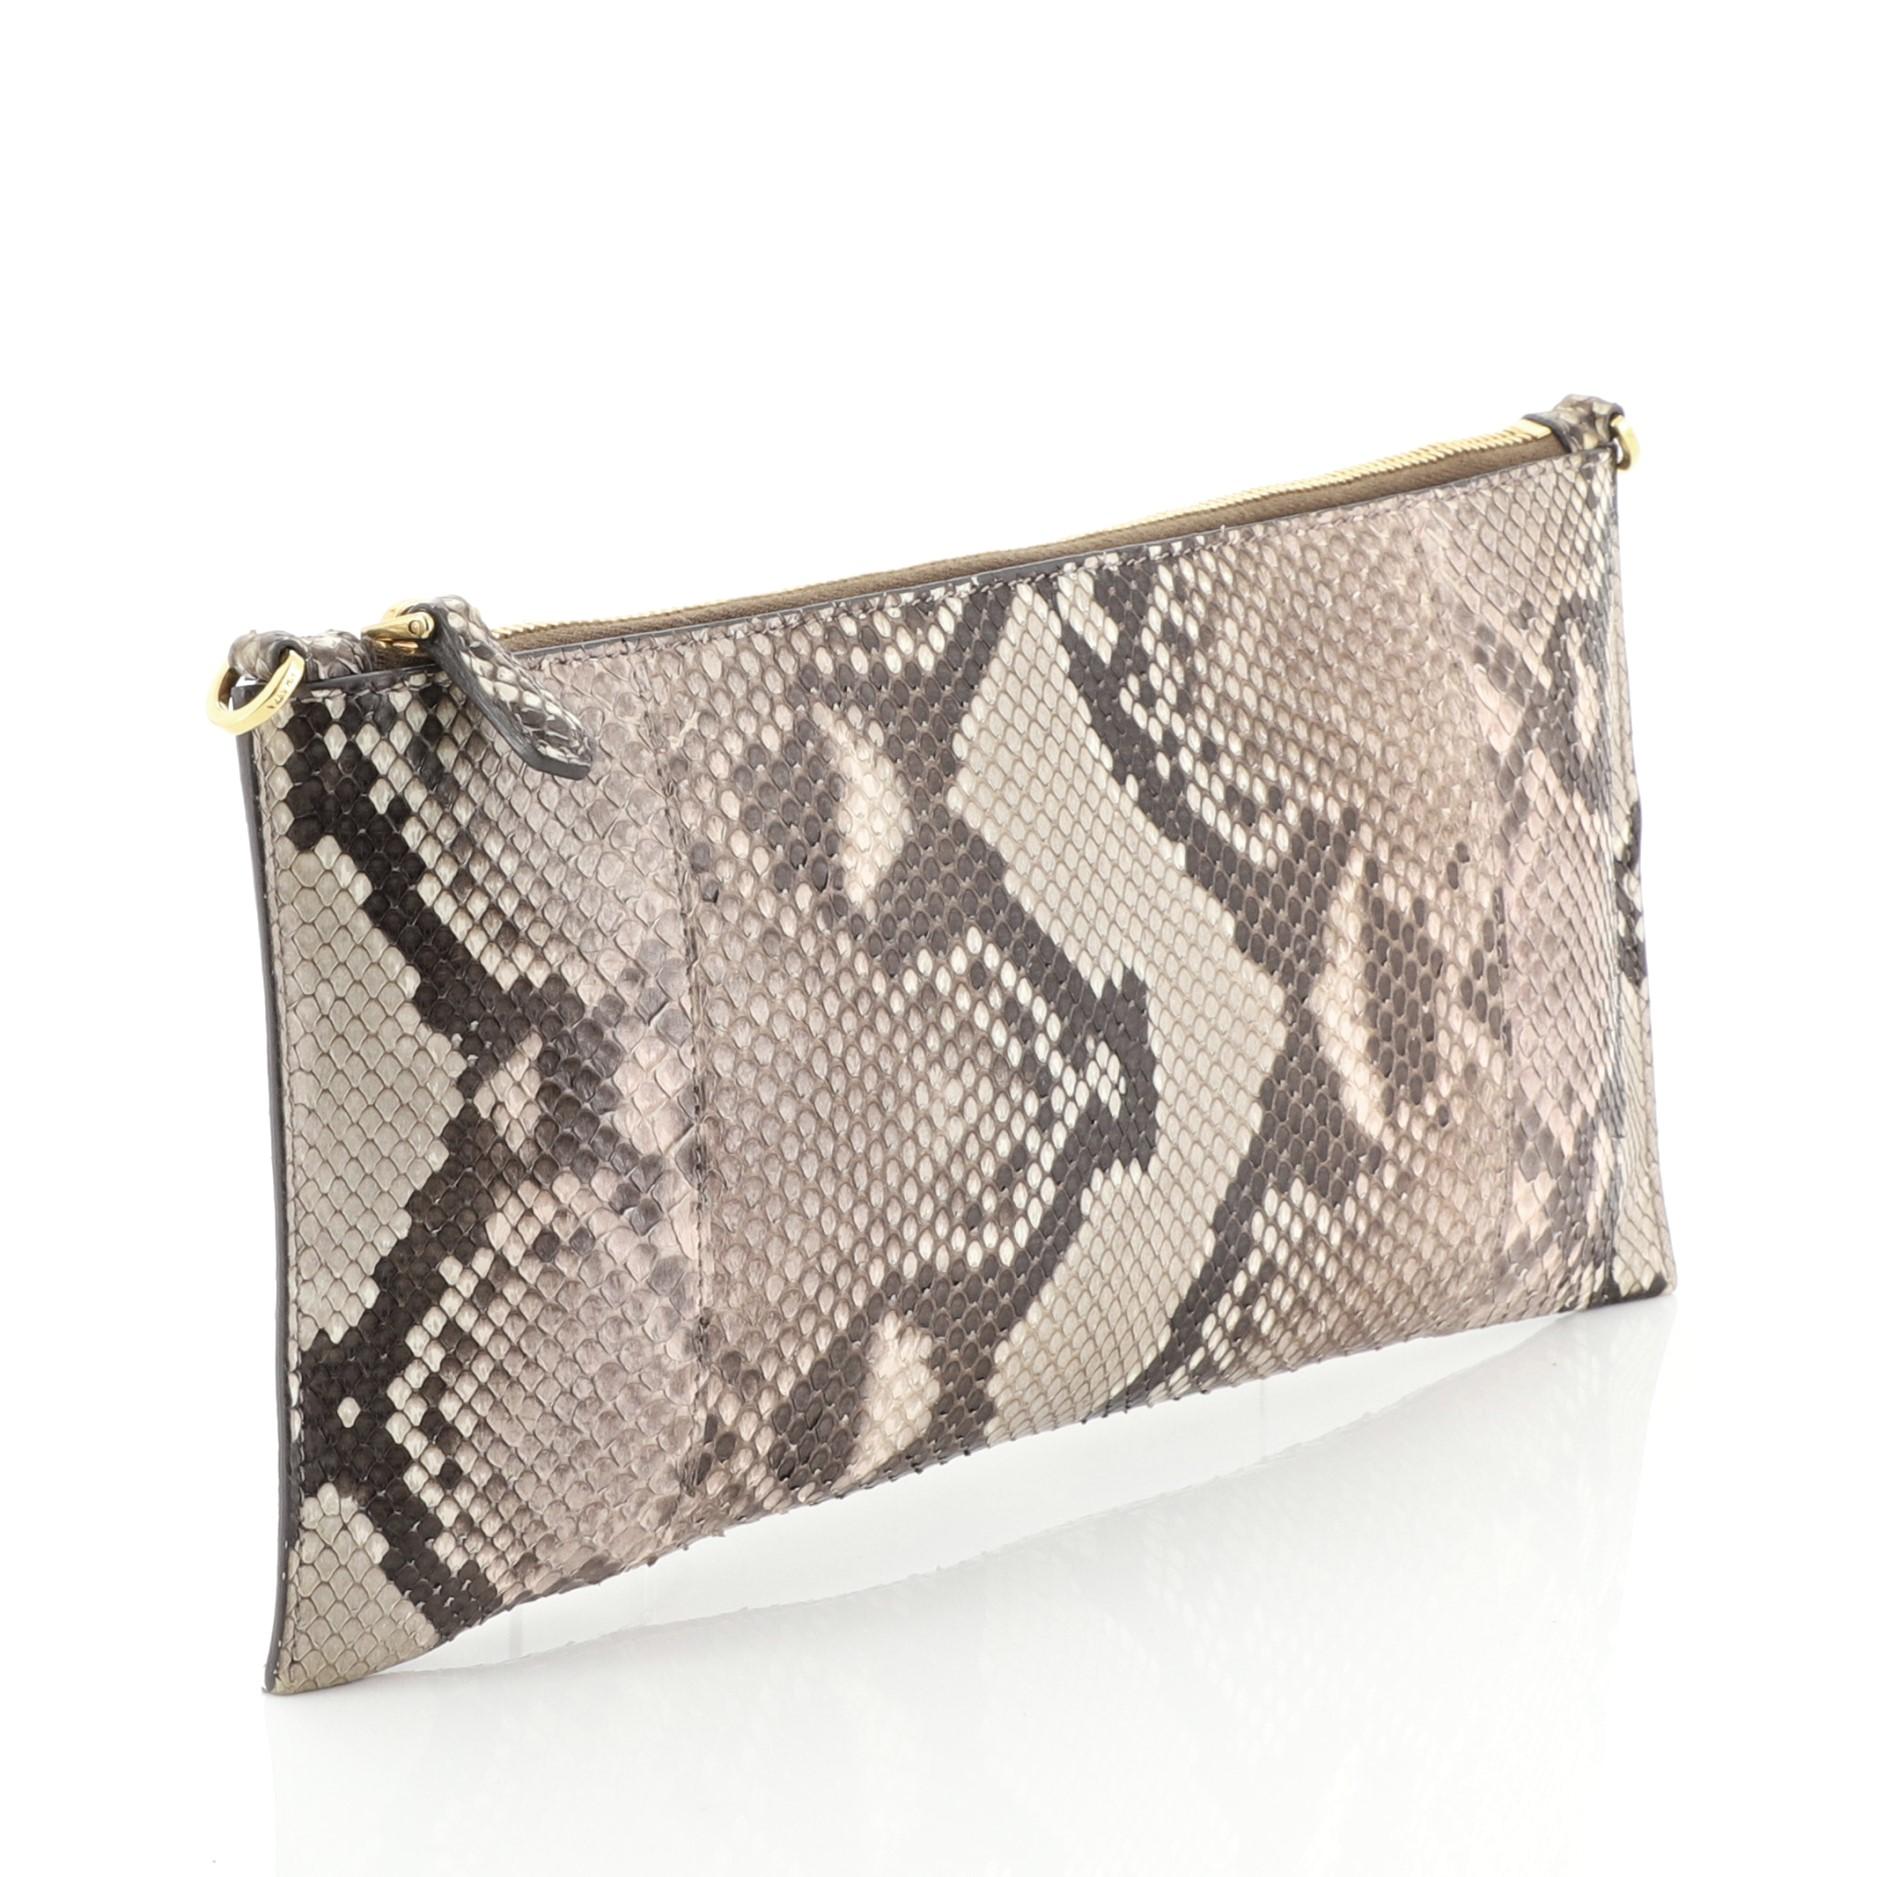 This Prada Crossbody Bag Python Small, crafted in genuine neutral python, features an adjustable strap and gold-tone hardware. Its zip closure opens to a brown leather interior with zip and slip pockets. This item can only be shipped within the